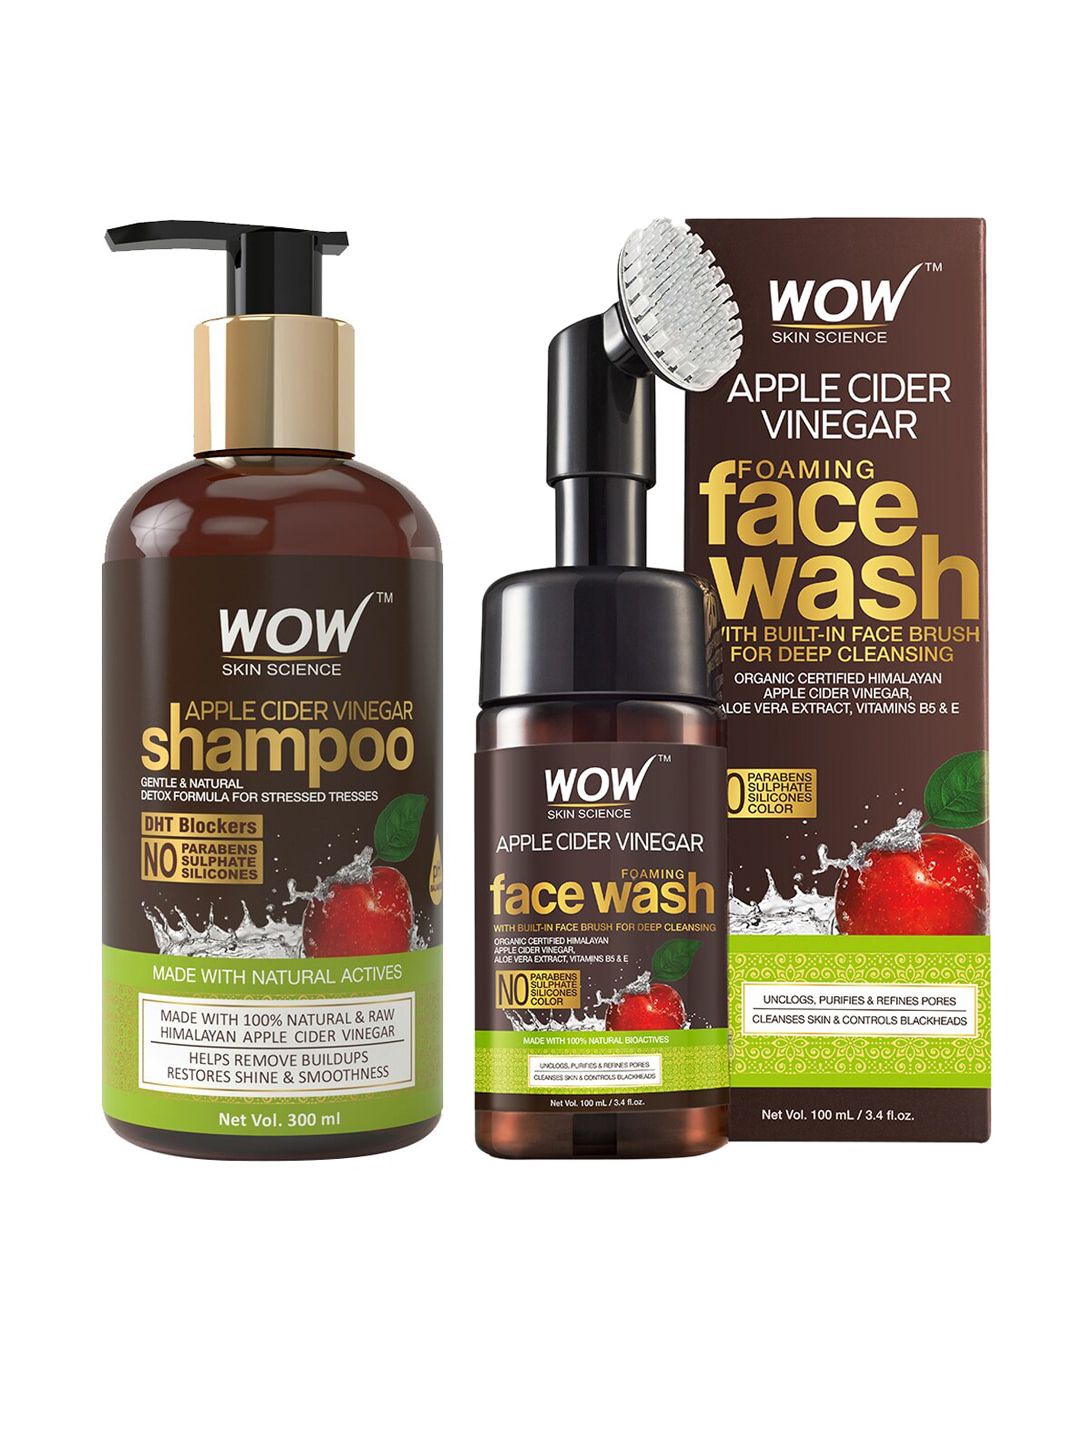 WOW SKIN SCIENCE Unisex Set of Apple Cider Vinegar Shampoo & Foaming Face Wash - 400 ml Price in India